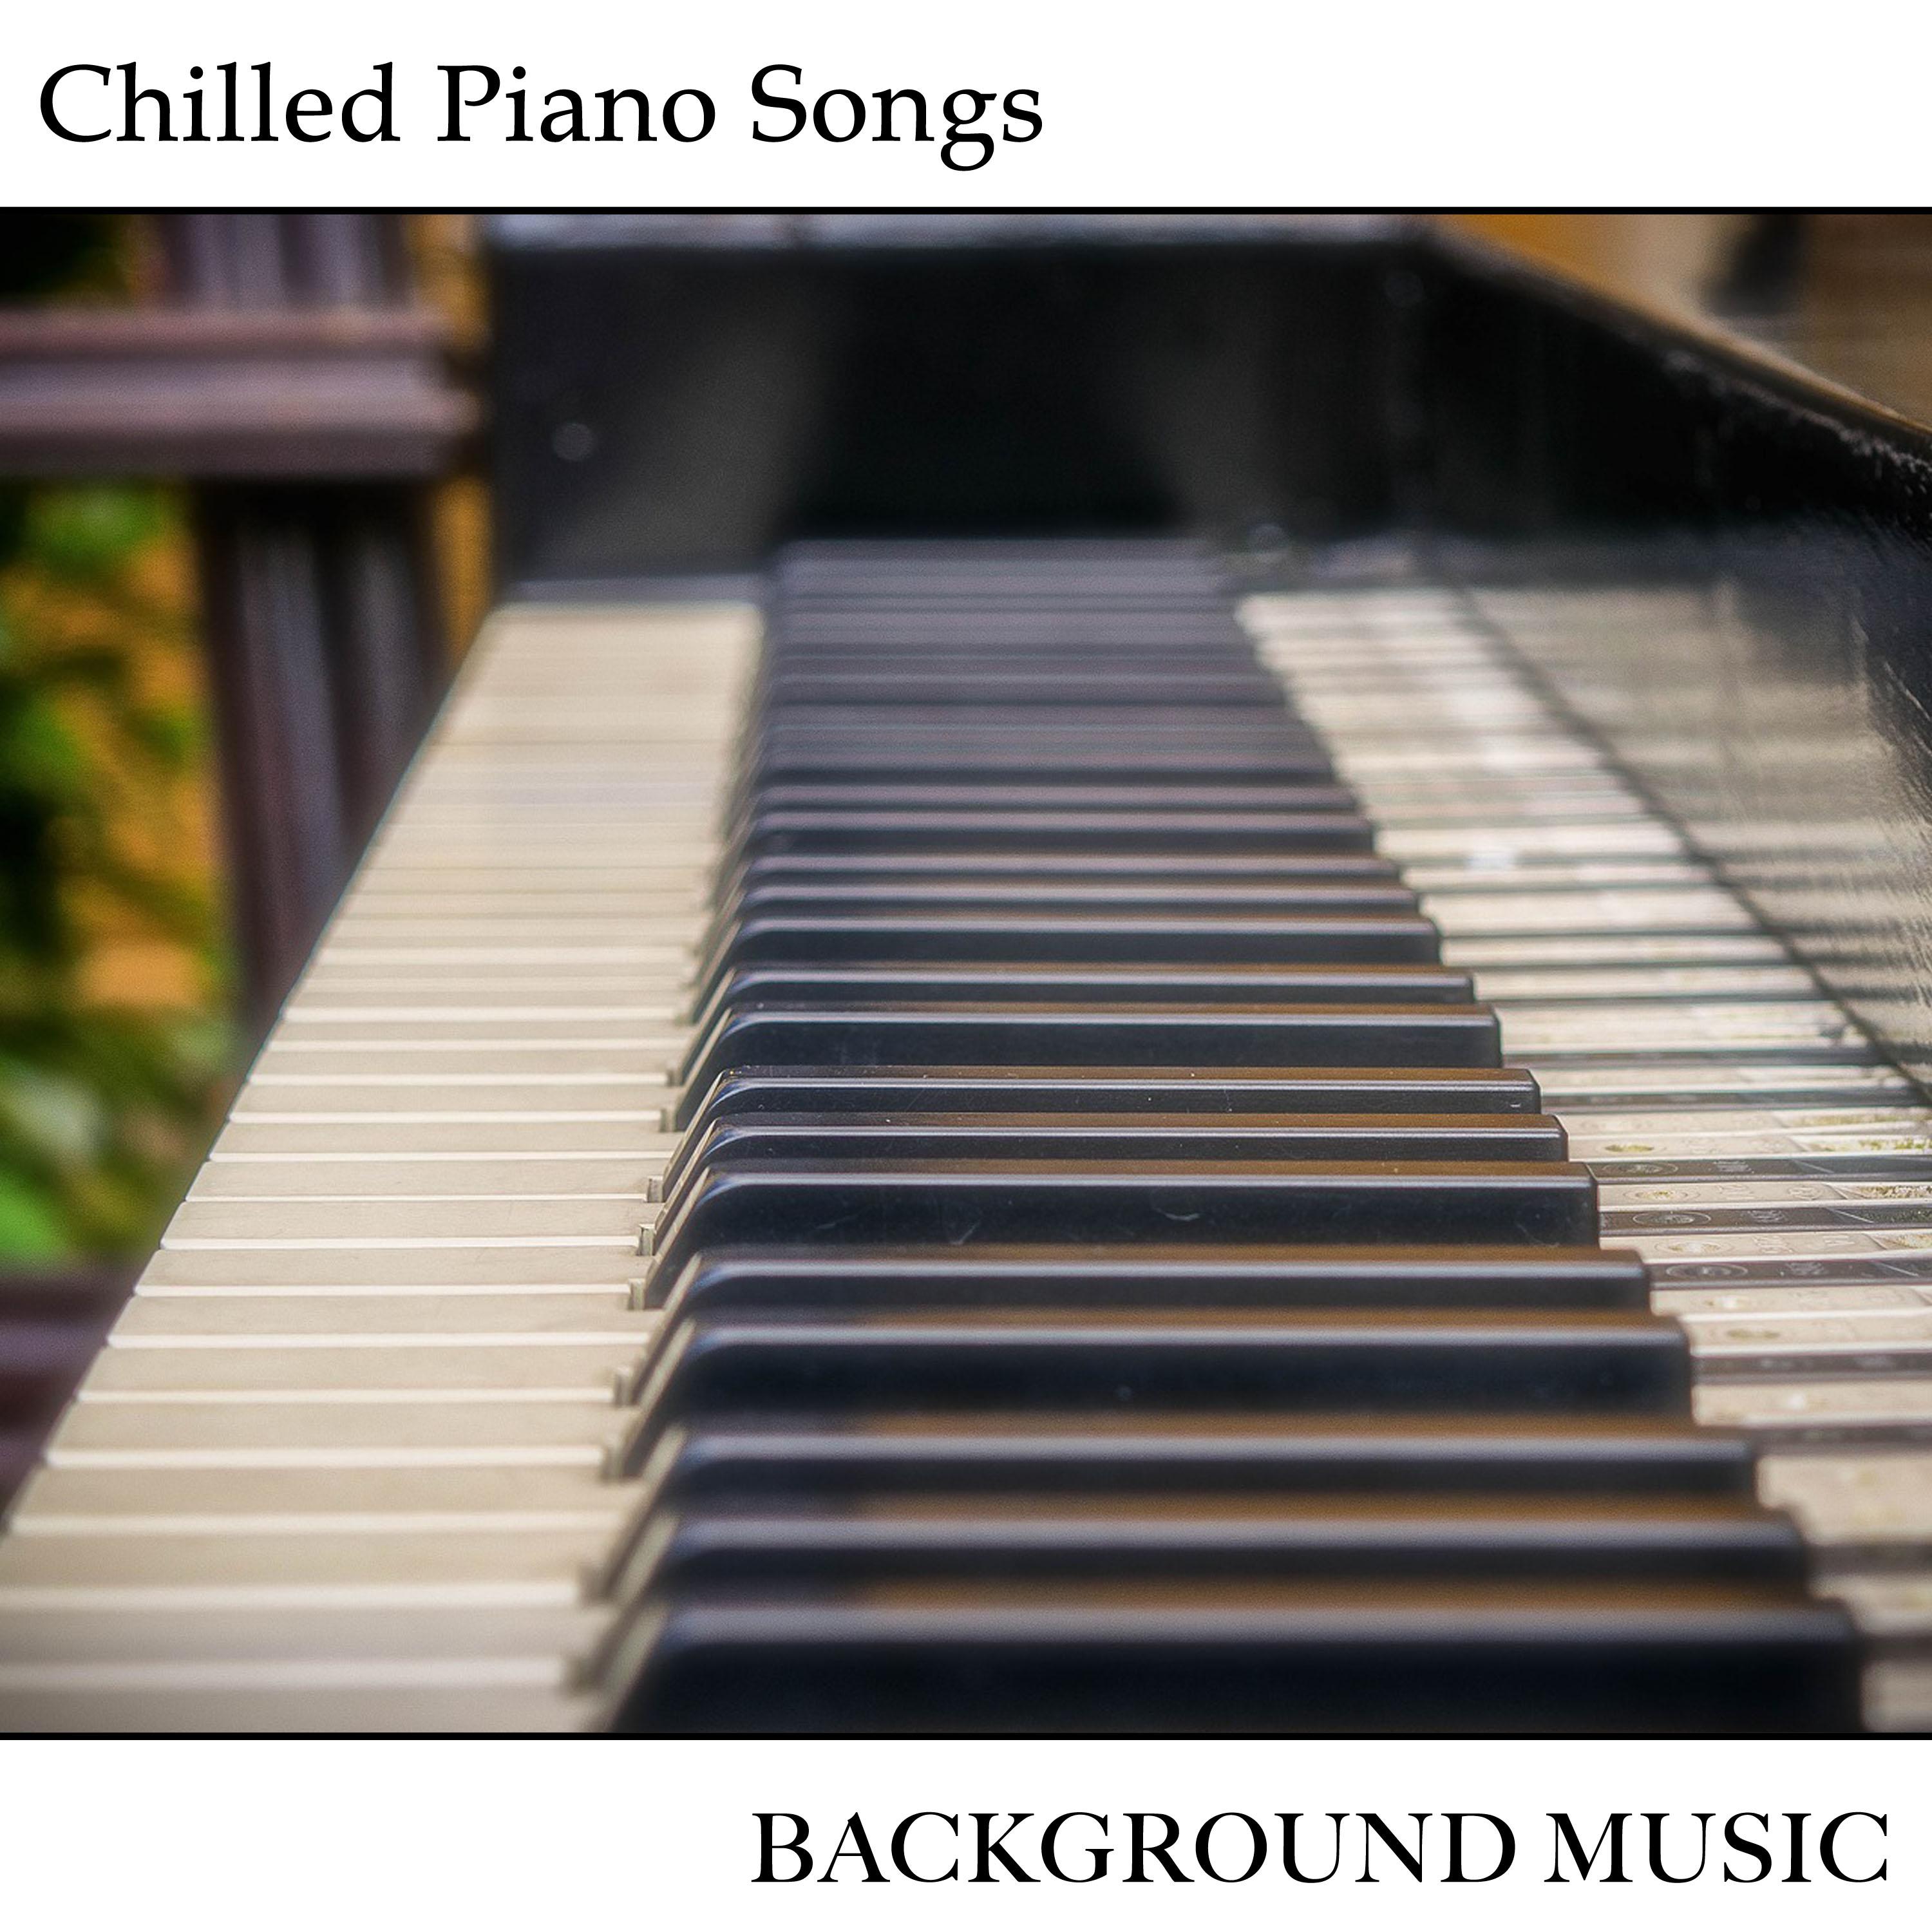 13 Chilled Piano Songs for Restaurants and Background Music